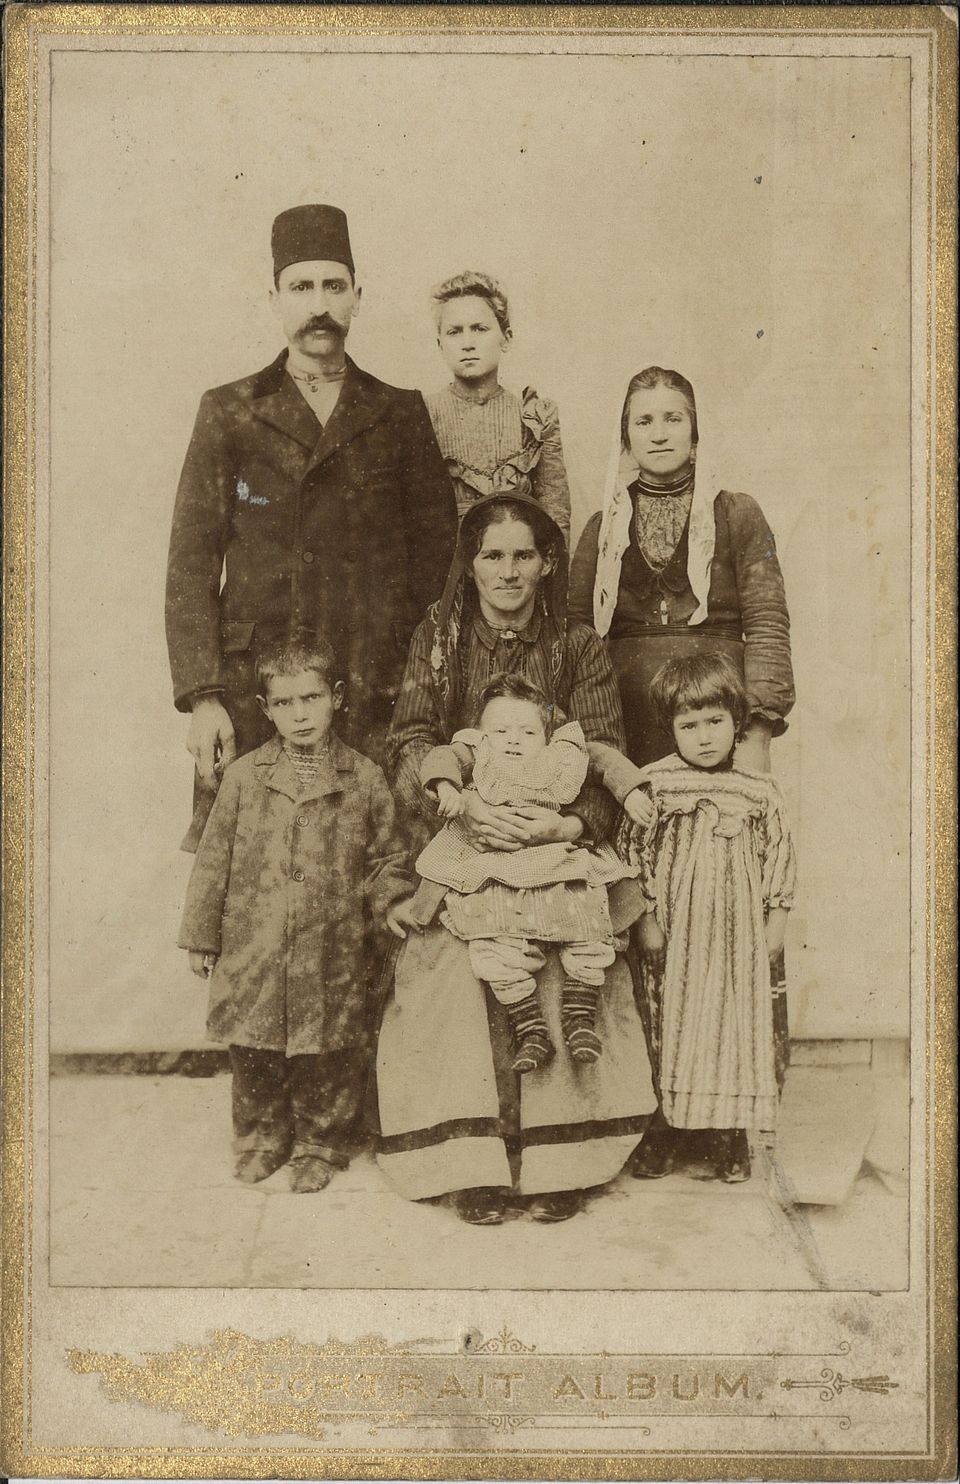 Photograph of Dikran Asarian from Sivas and six members of his family, all bound for America. May 21, 1906. Courtesy of Başbakanlık Osmanlı Arşivleri (Prime Ministry Archives, Istanbul)